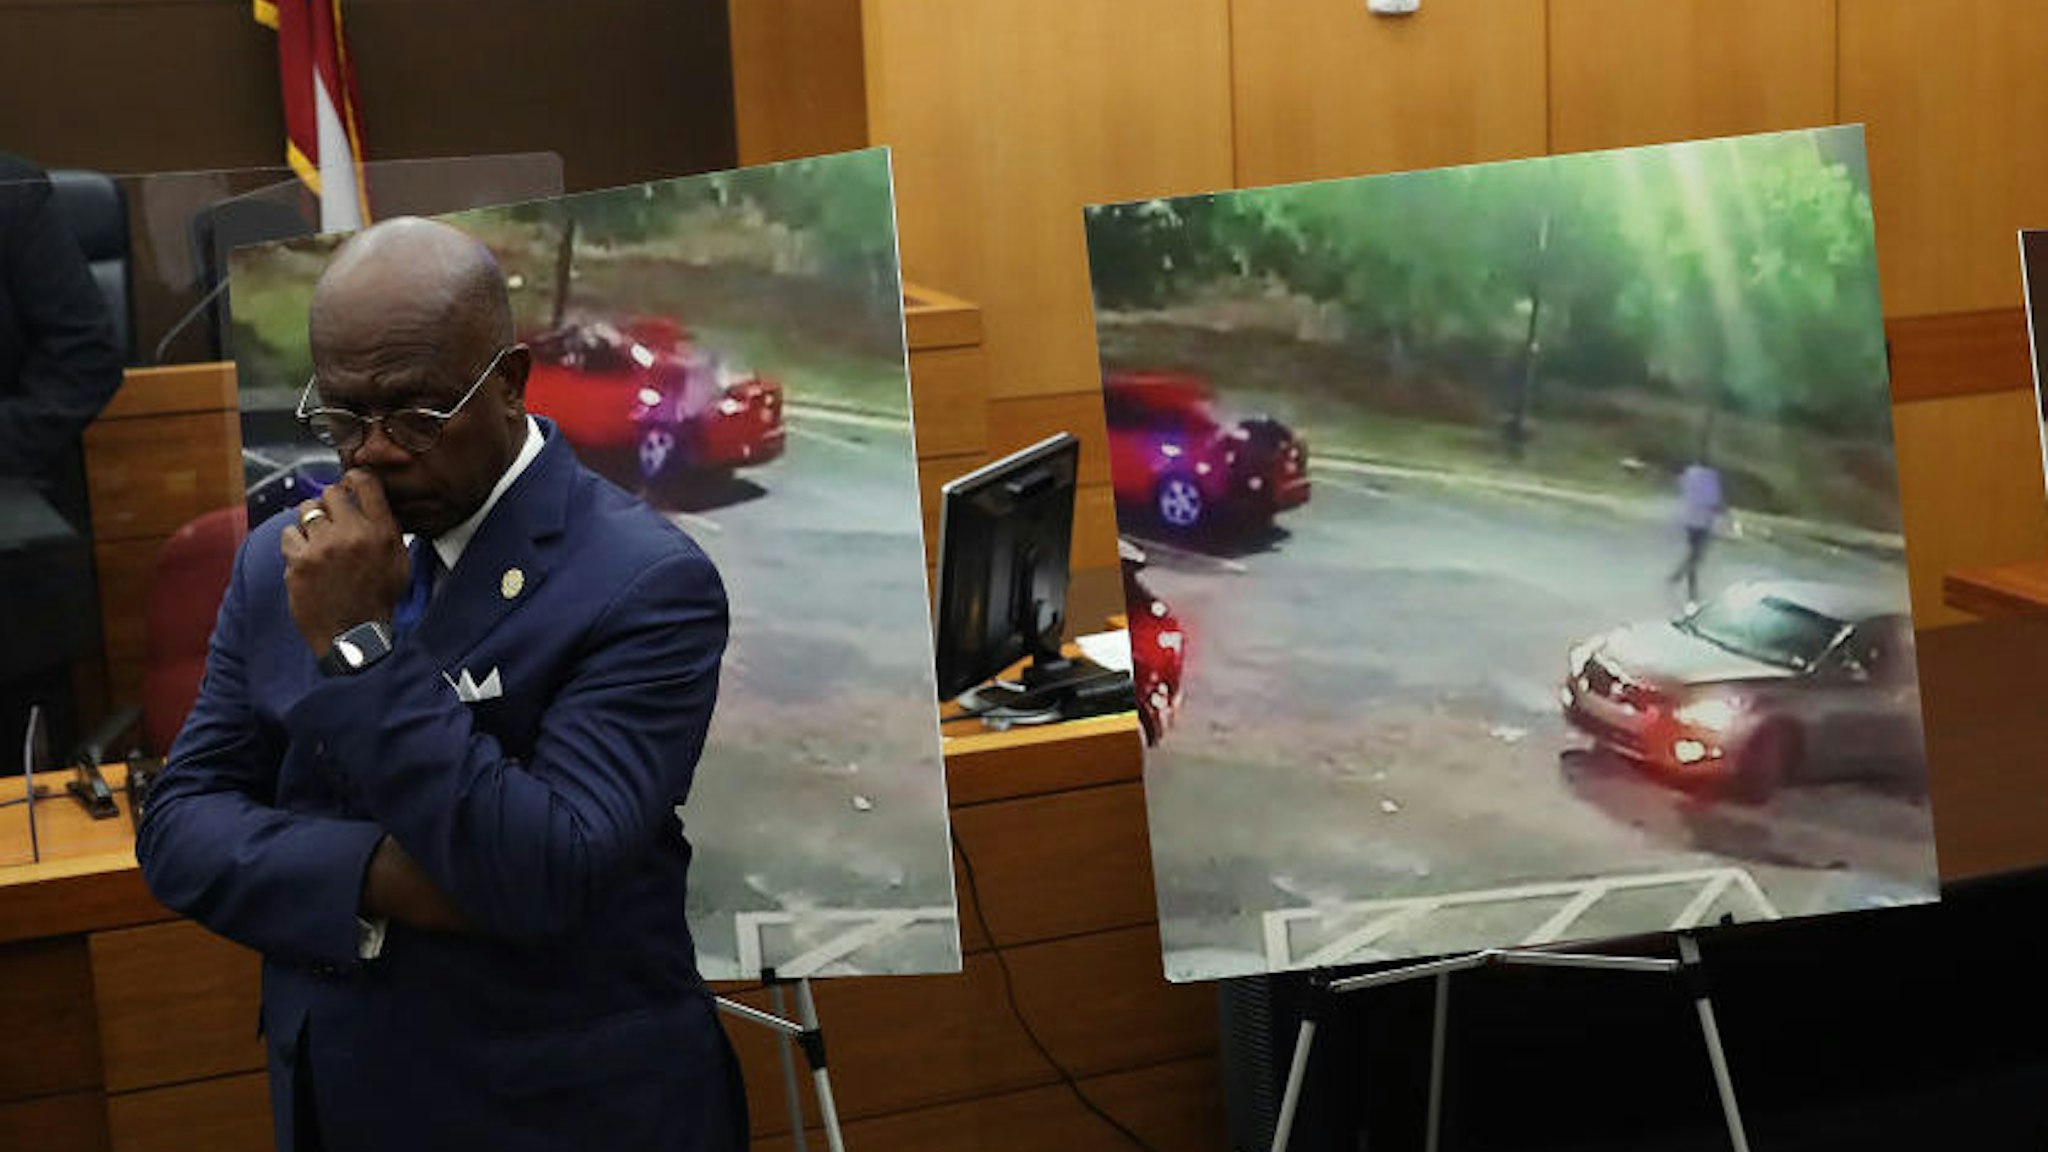 Fulton County District Attorney Paul L. Howard Jr. announces 11 charges against former Atlanta Police Officer Garrett Rolfe on June 17, 2020 in Atlanta, Georgia.¬†Rolfe is charged with felony murder of Rayshard Brooks, 27, on June 12¬†while chasing Brooks after a struggle during a field sobriety test in a Wendy's restaurants parking lot. (Photo by Joe Raedle/Getty Images)